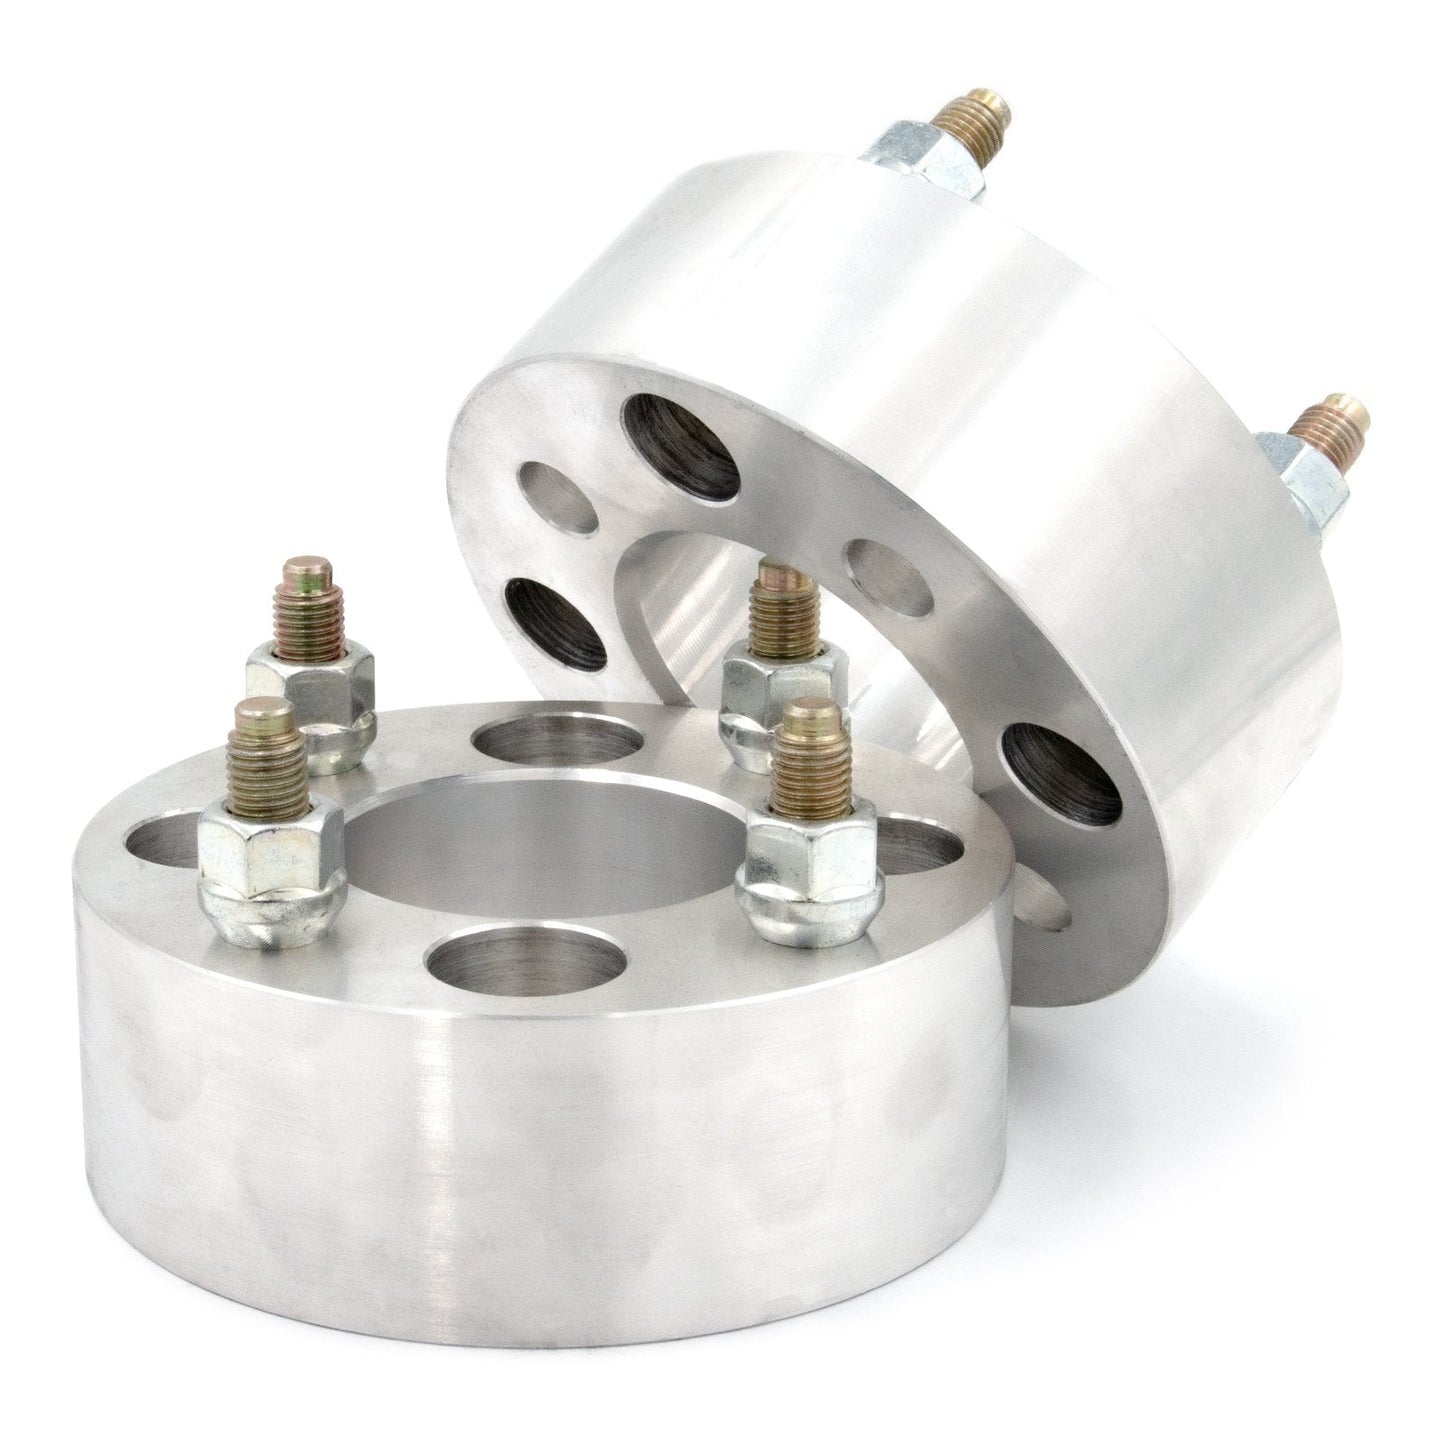 4x144 to 4x115 Wheel Spacer/Adapter - Thickness: 1"- 4"